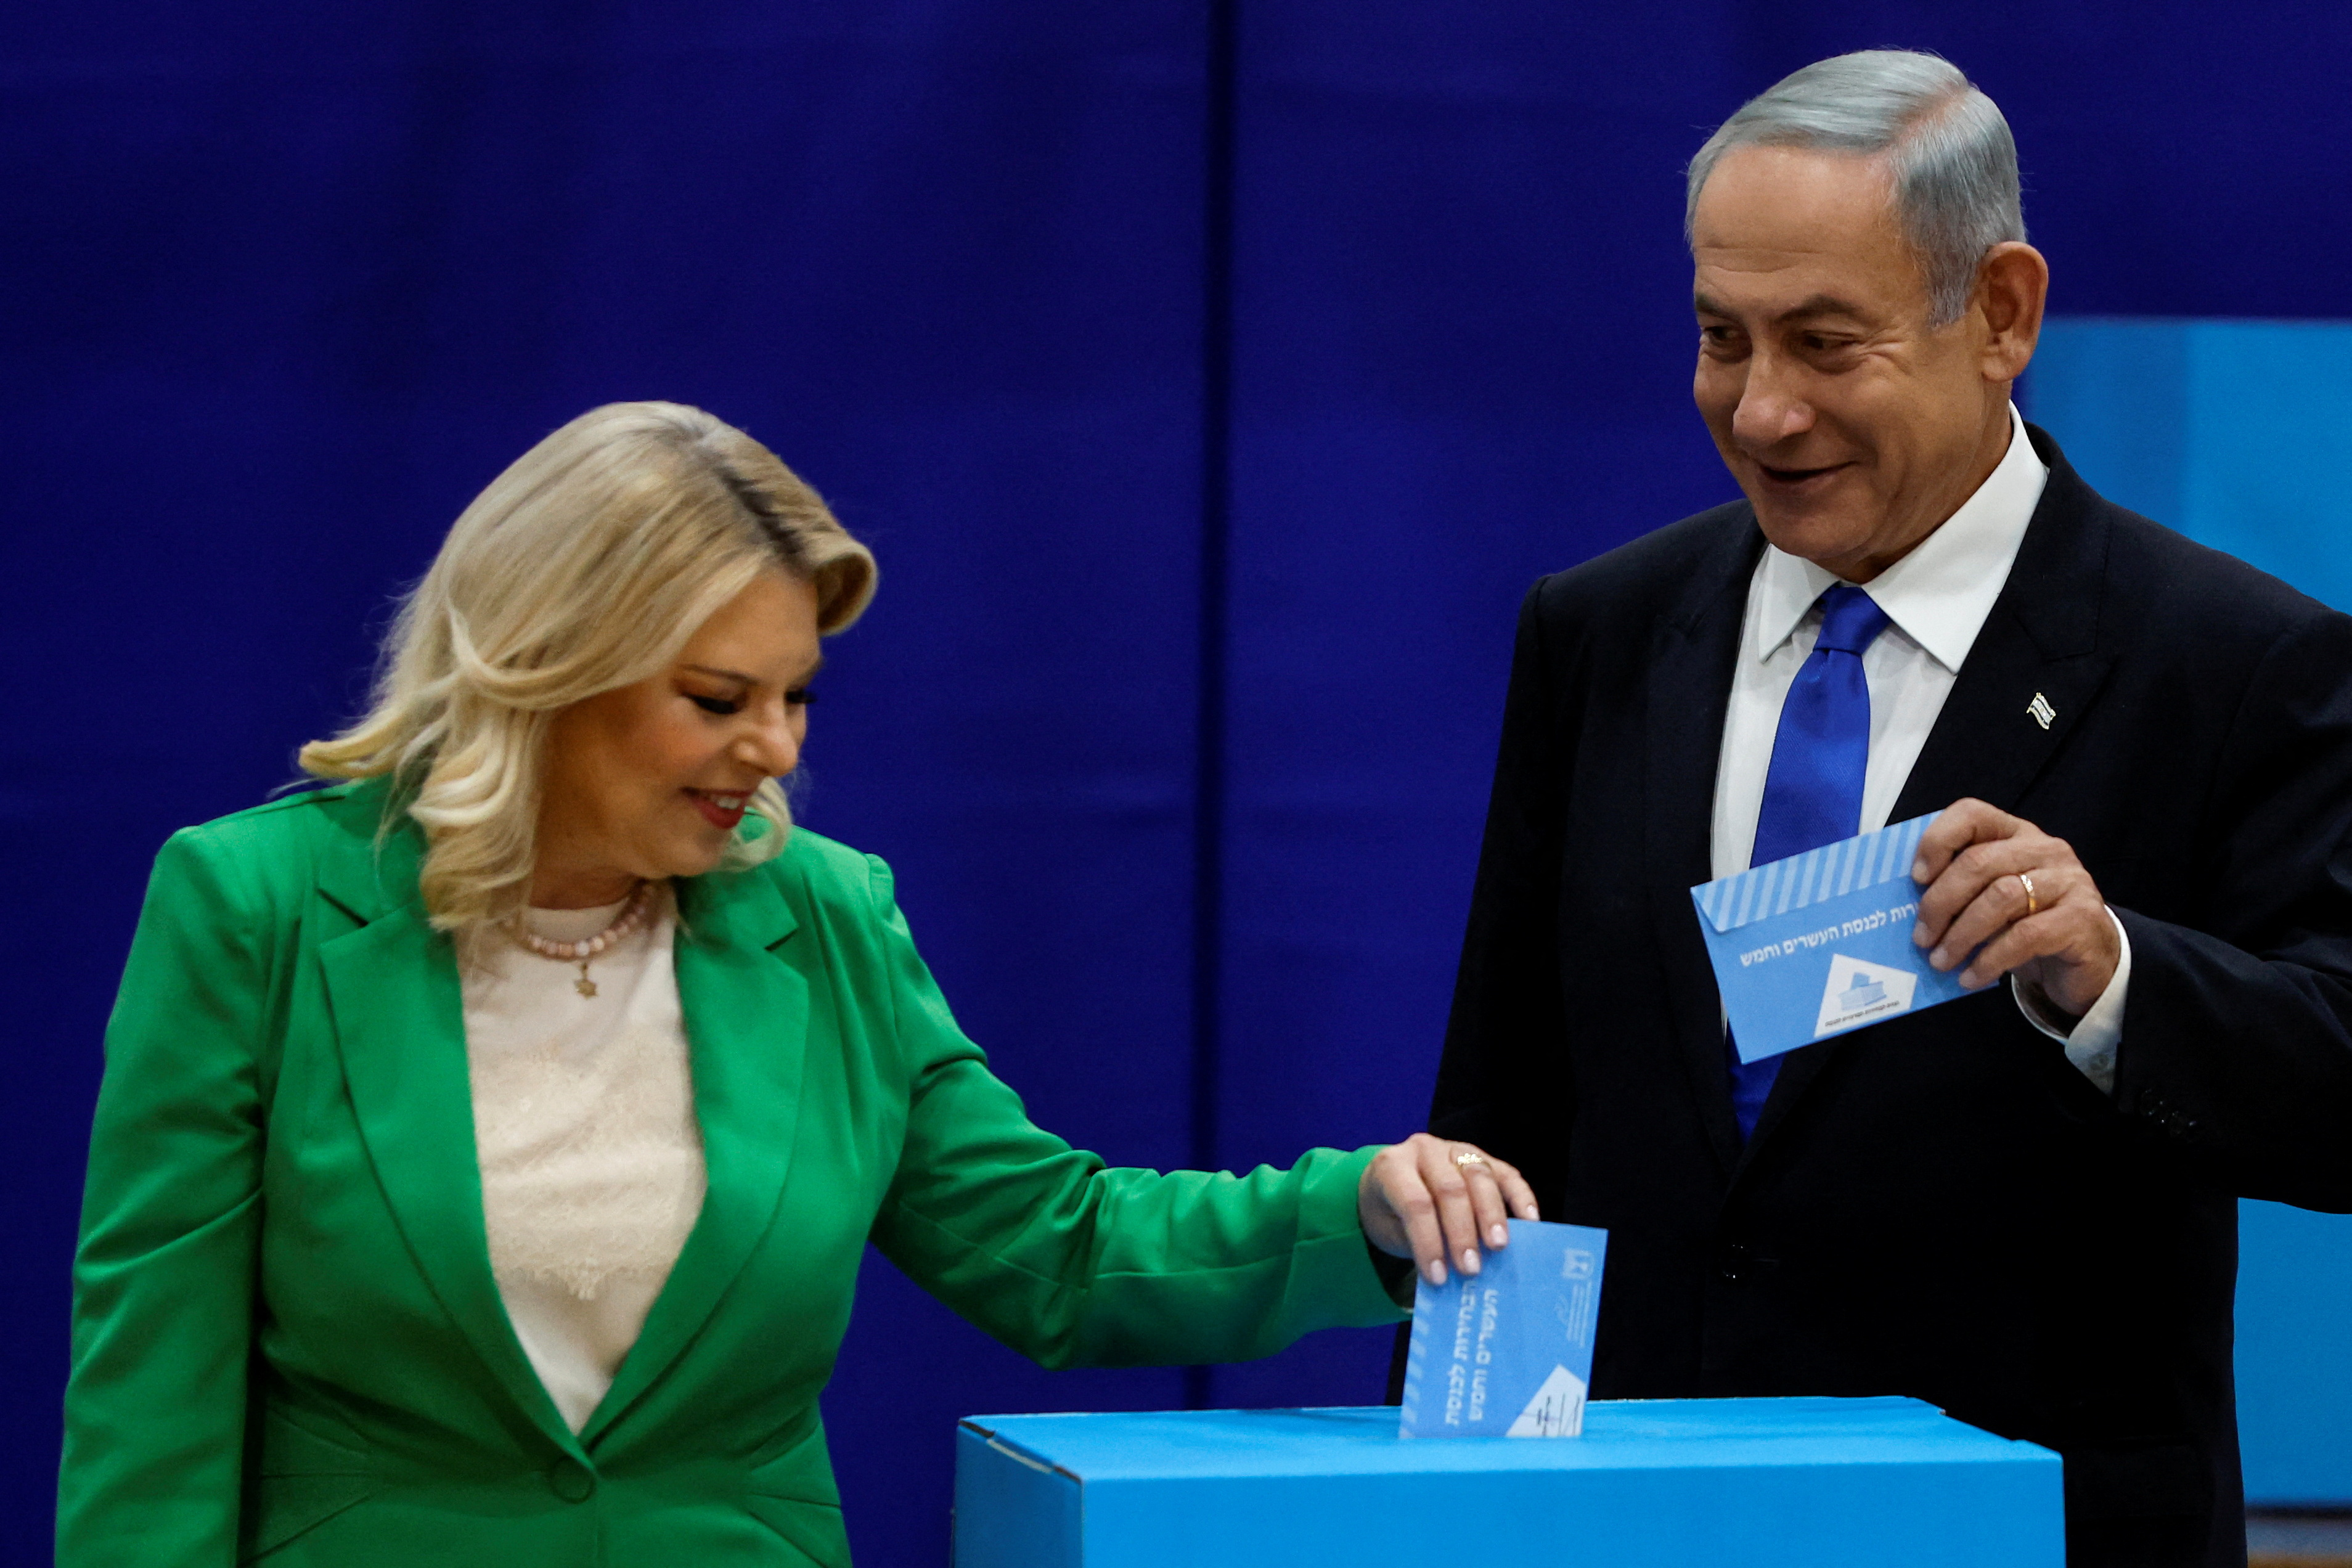 Former Israeli Prime Minister Netanyahu casts his ballot on the day of Israel's general election in a polling station in Jerusalem